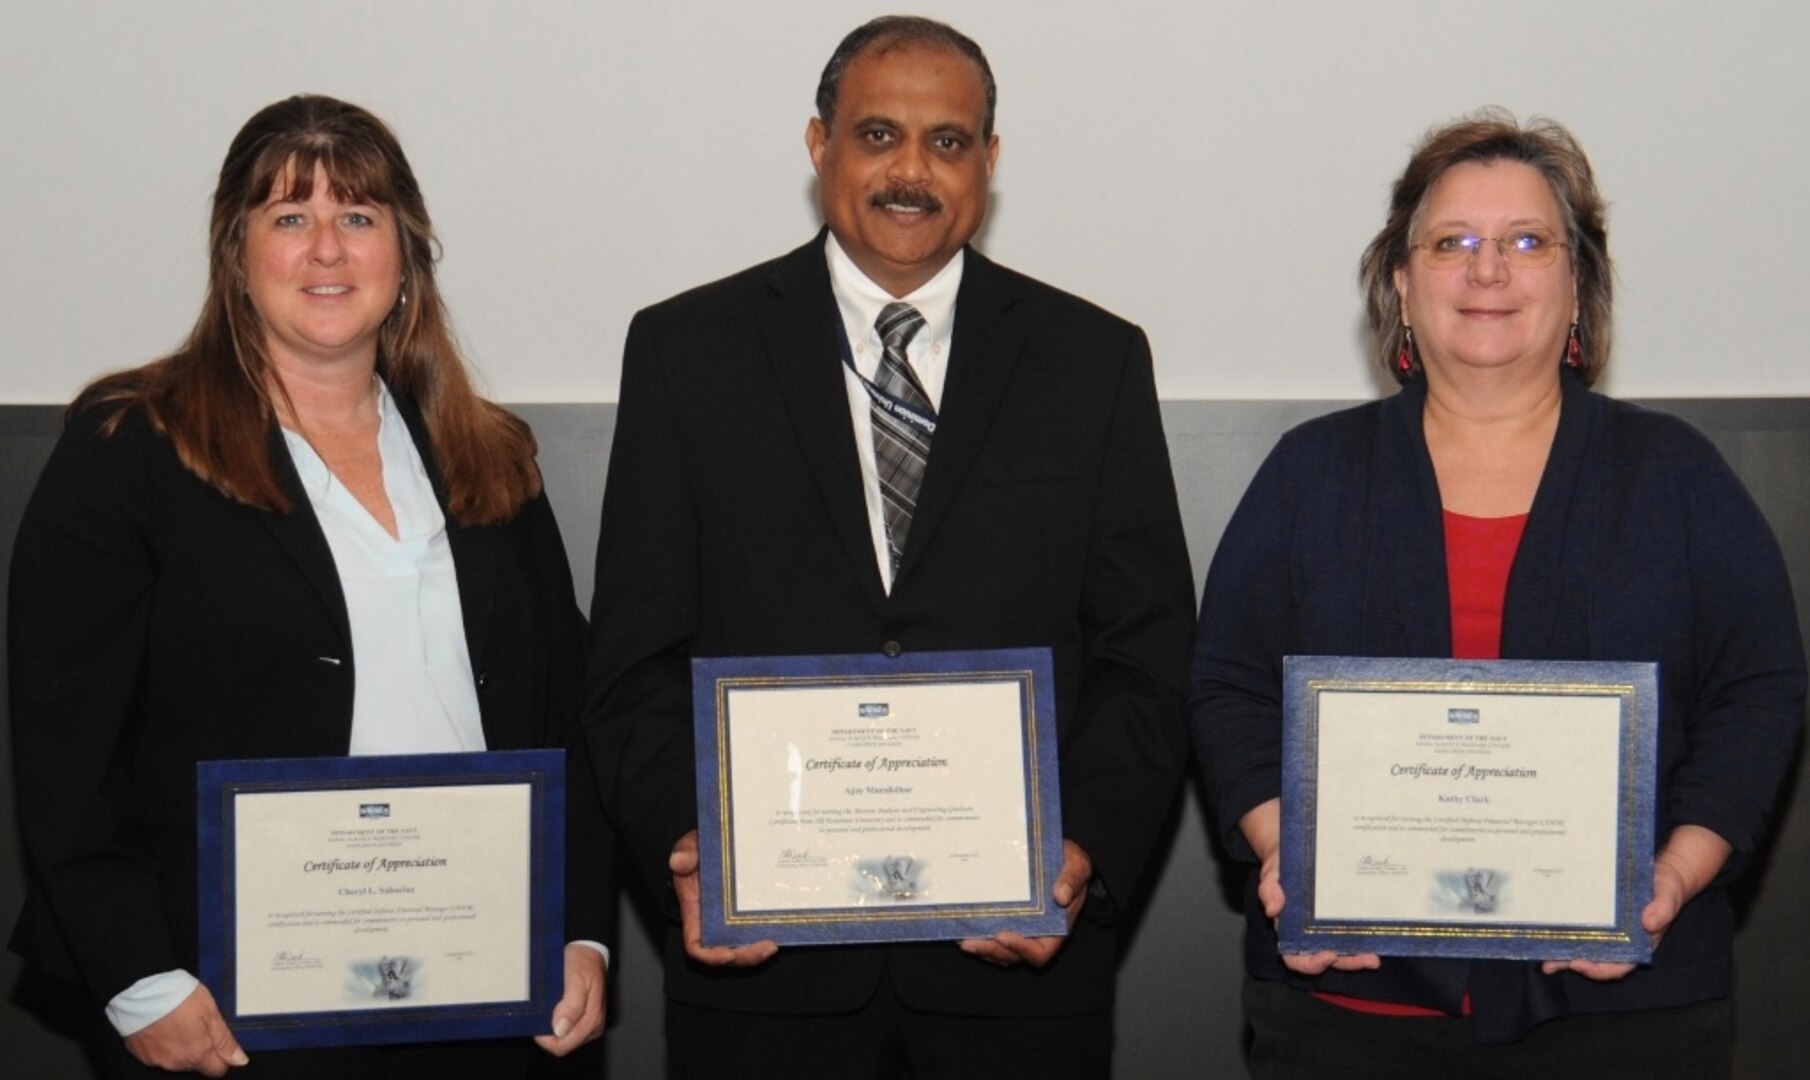 IMAGE: DAHLGREN, Va. - Cheryl Subacius, Ajoy Muralidhar, and Kathy Clark, (l to r), are pictured with their certificates of achievement at the 2017 Naval Surface Warfare Center Dahlgren Division (NSWCDD) academic awards ceremony. Subacius was recognized for completing her defense financial manager certification from the American Society of Military Comptrollers. Muralidhar was recognized for completing his graduate certificate in mission analysis and engineering from Old Dominion University. Clark was recognized for completing her defense financial manager certification from the American Society of Military Comptrollers.